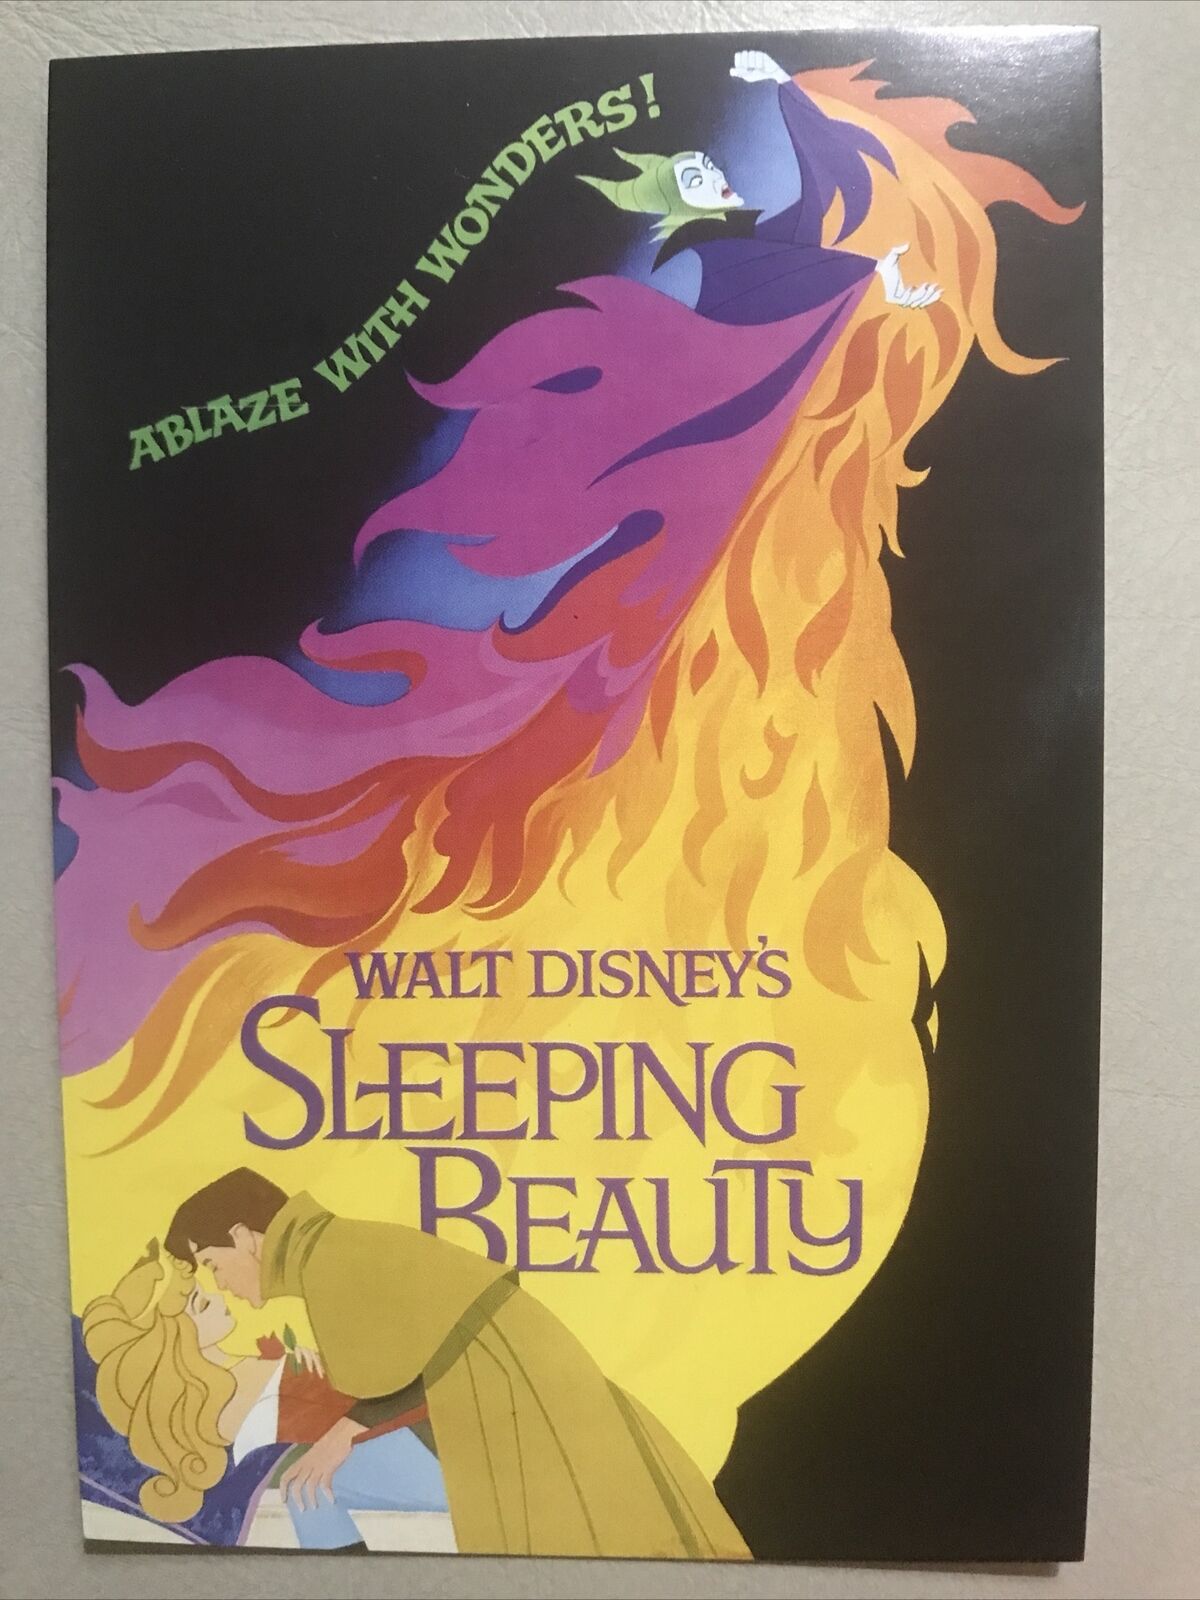 POSTCARD ART OF DISNEY, MOVIE POSTER FEATURES SLEEPING BEAUTY 1970 RE-RELEASE #1